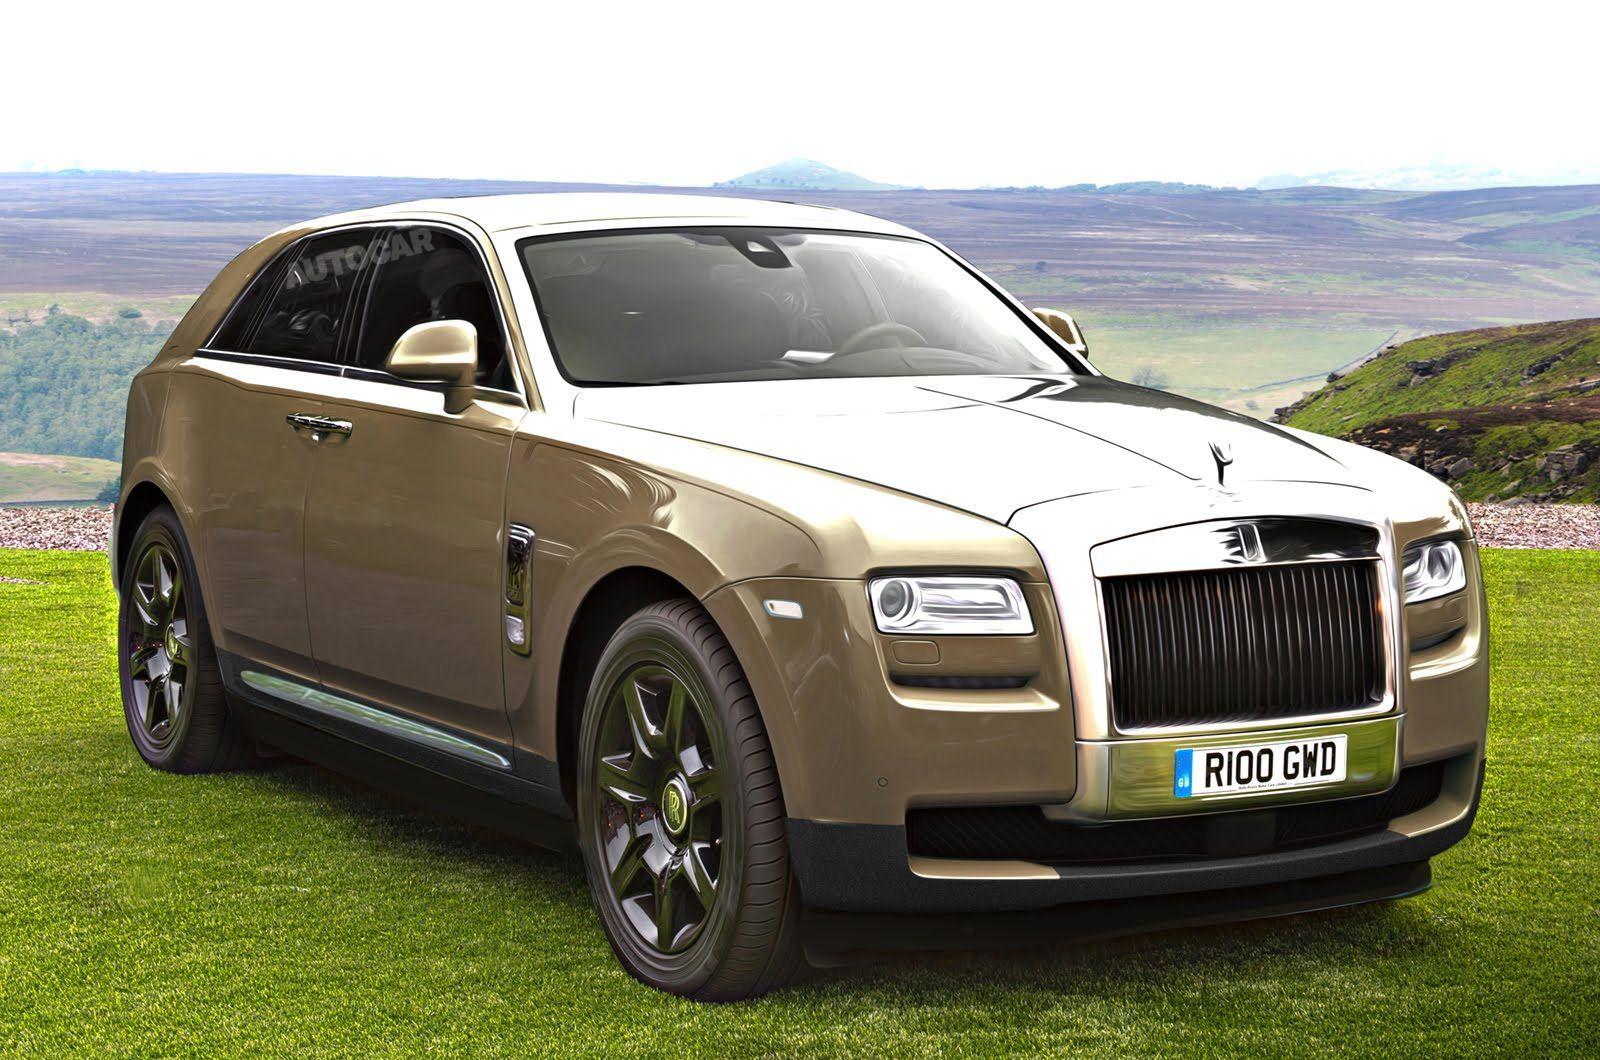 The Rolls Royce SUV: Everything You Need To Know. Rolls Royce